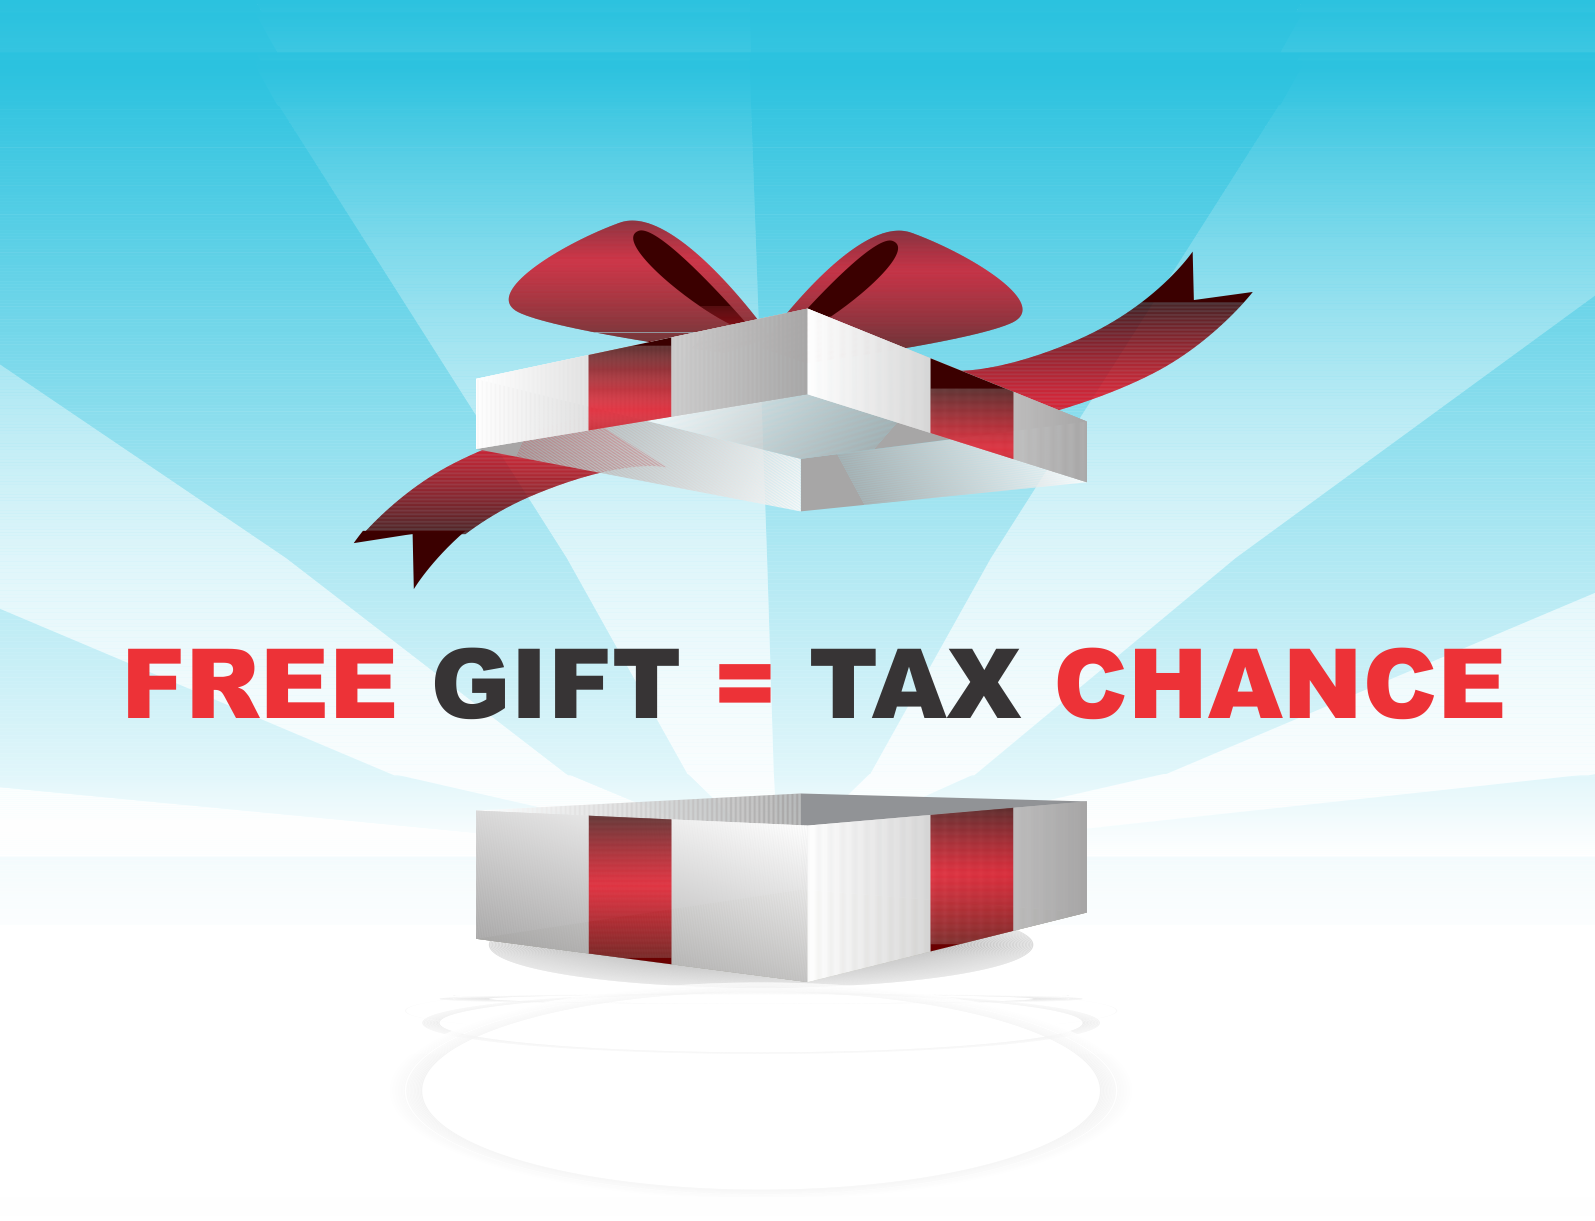 Is A Free Gift Worth Taking a Tax Chance?